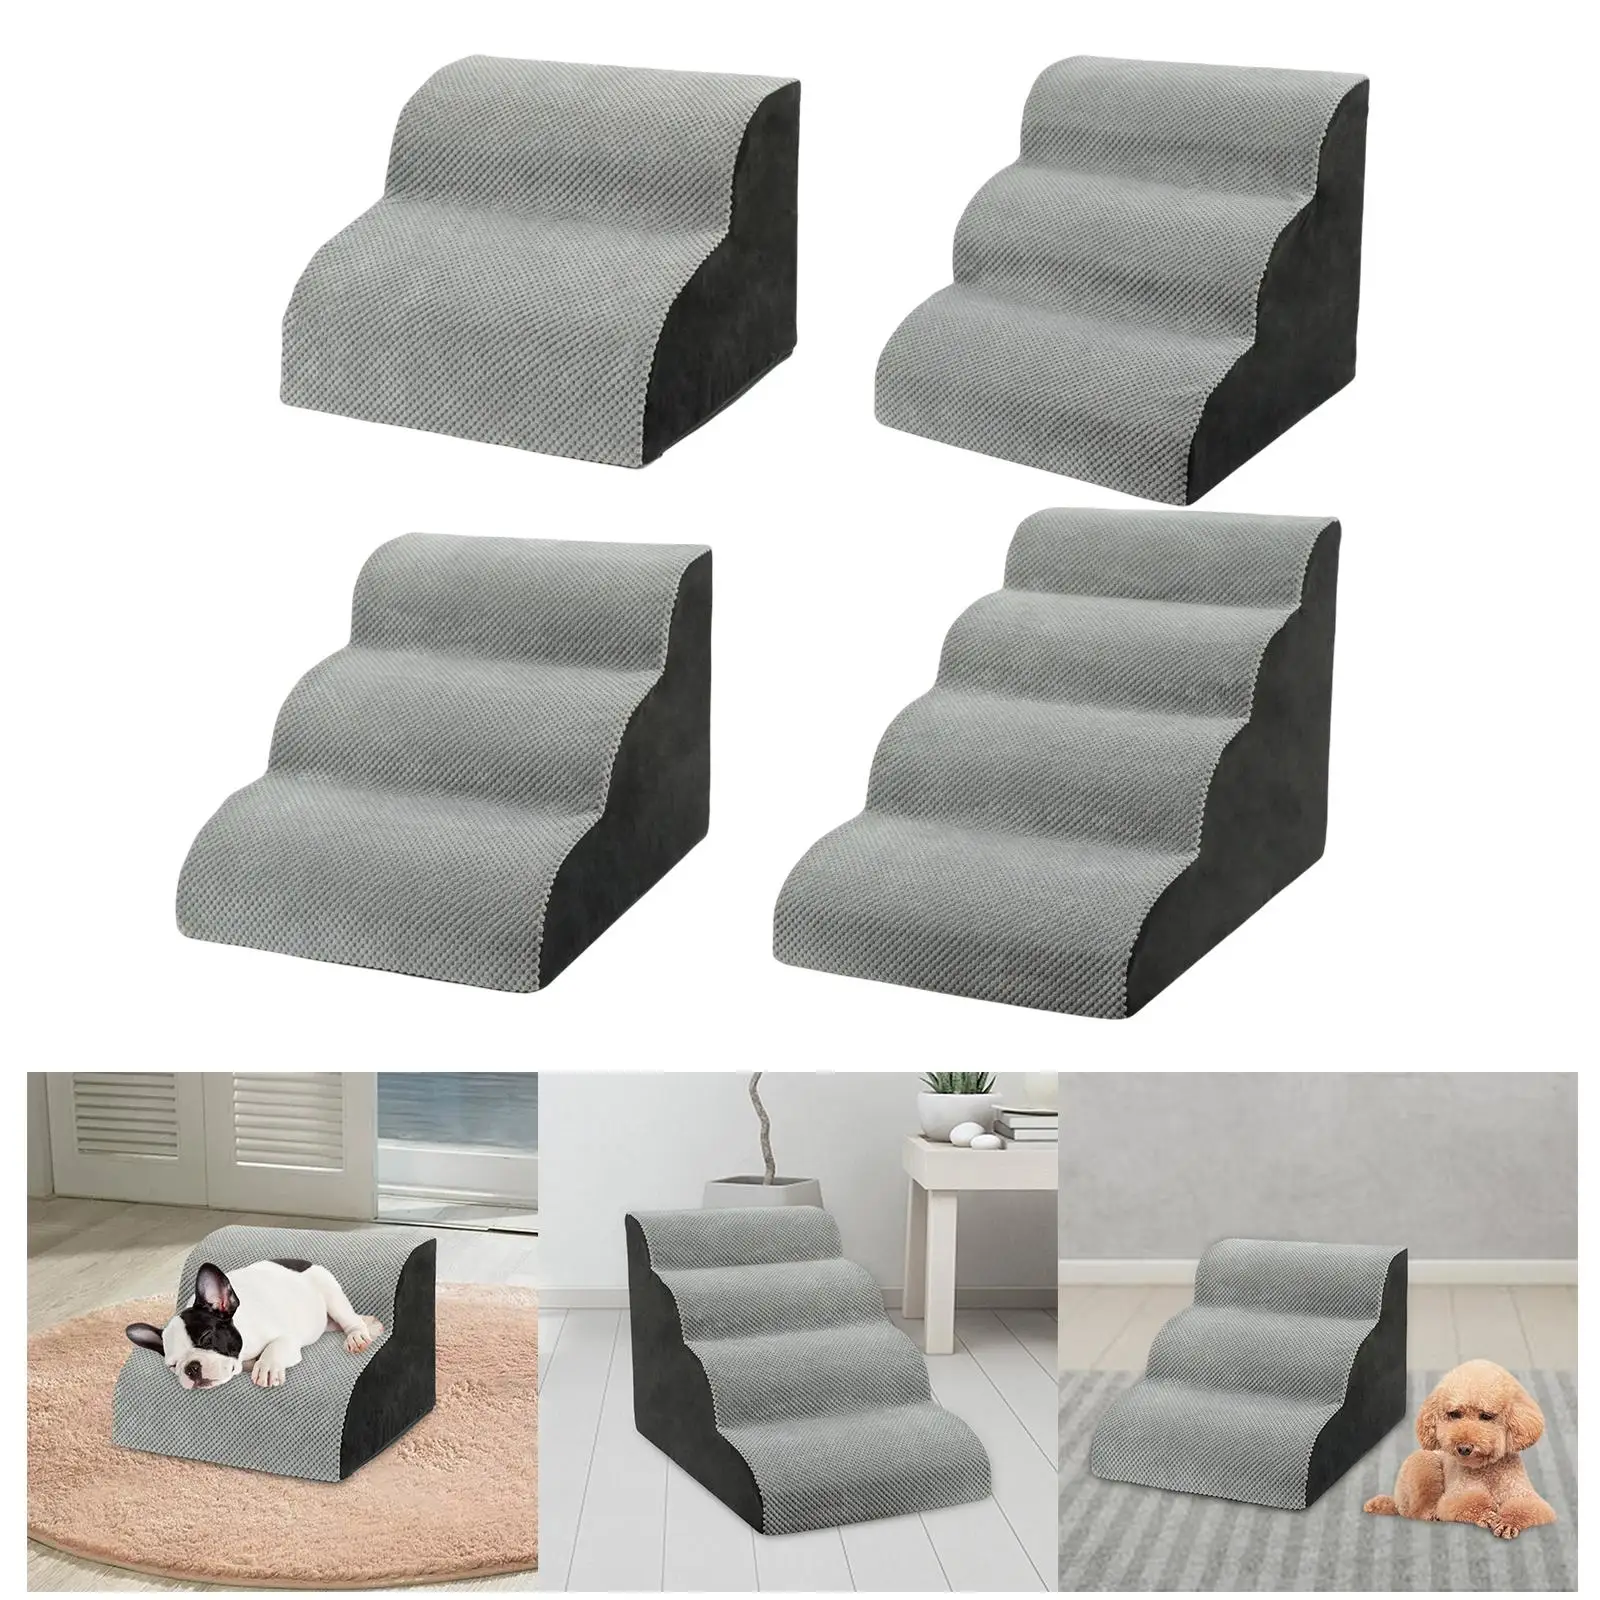 Dog Stairs Dog Ladder Ramp Climbing Pet Supplies Non Slip for Small Dogs Bed